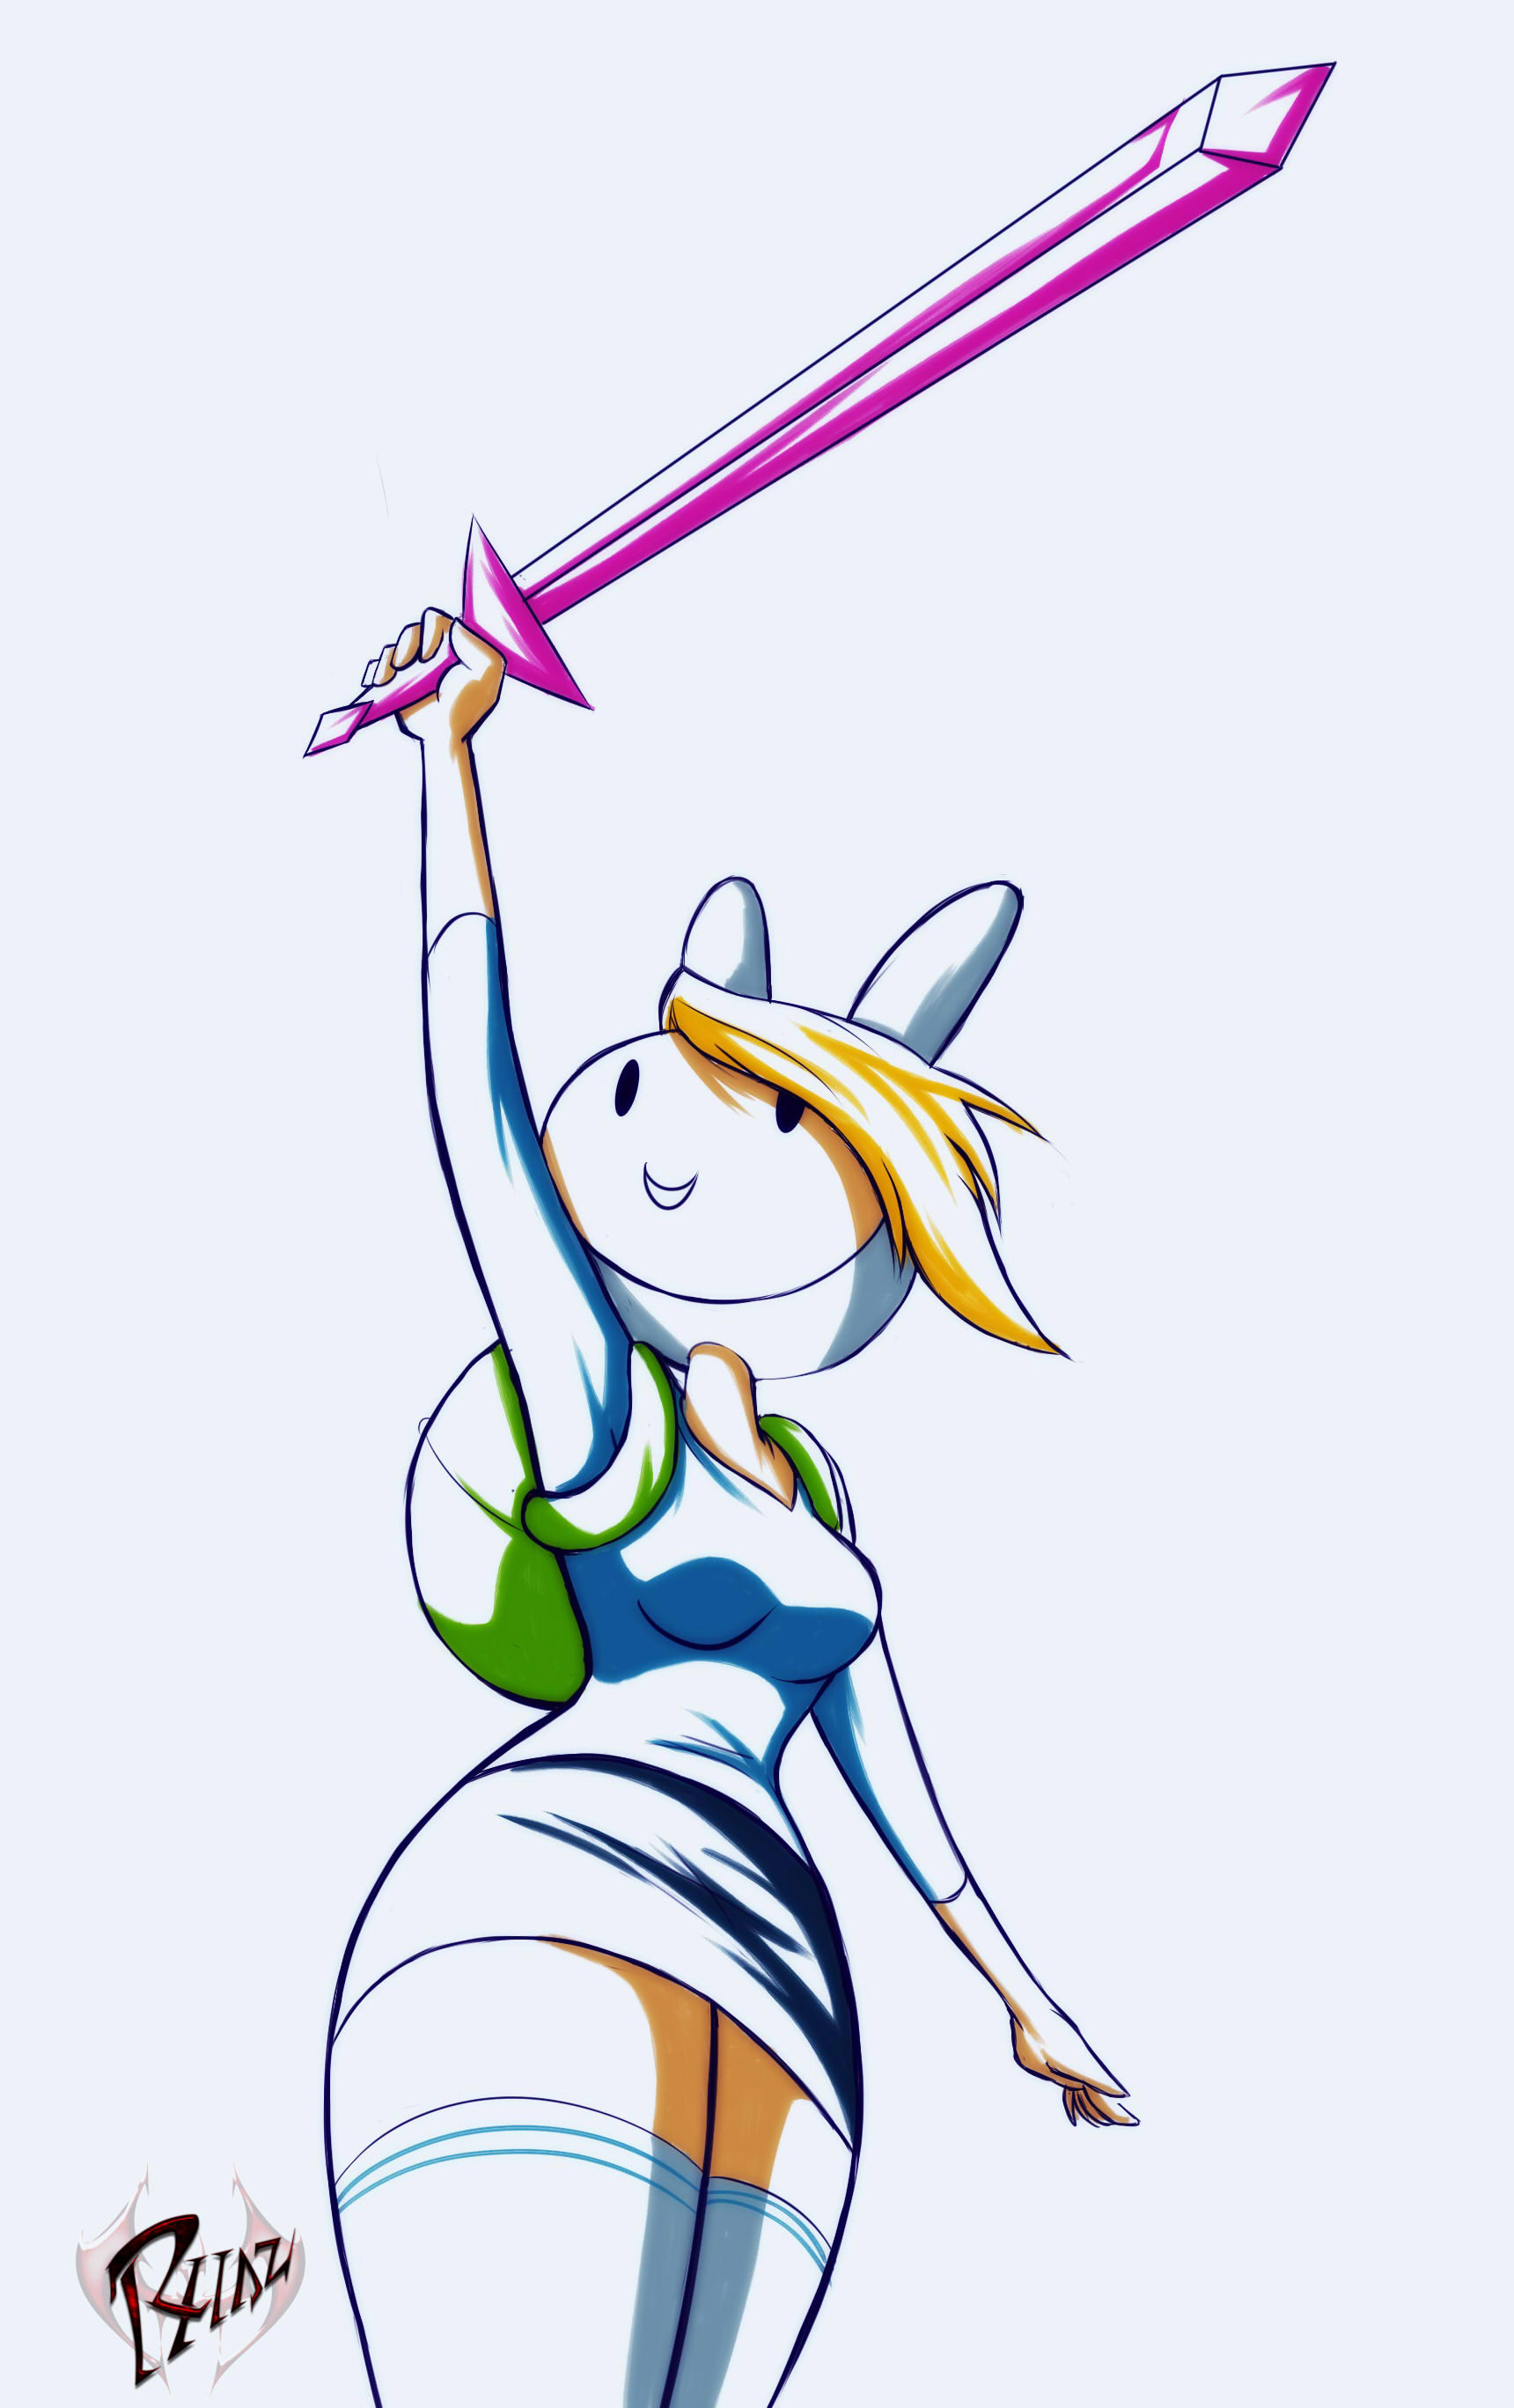 Fionna the Human by erohd on